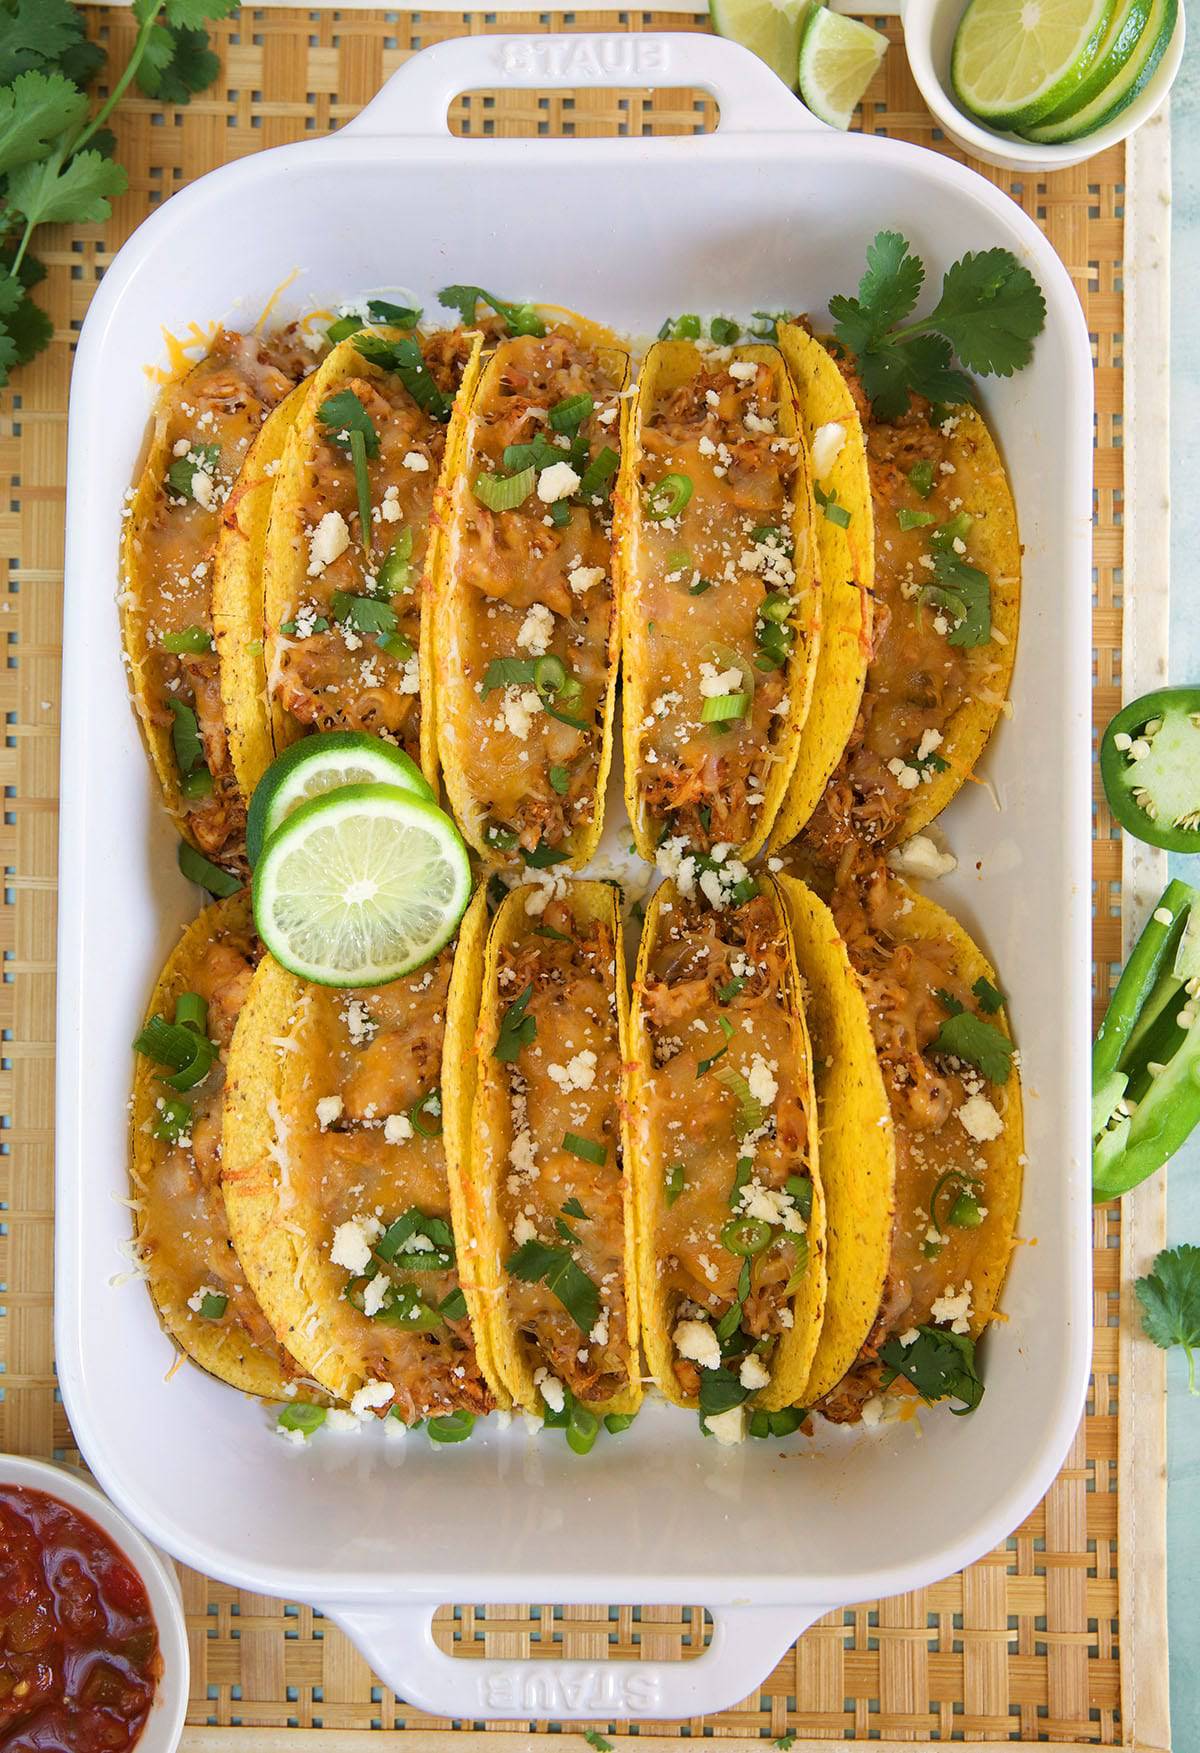 Ten tacos are placed in a large baking dish.